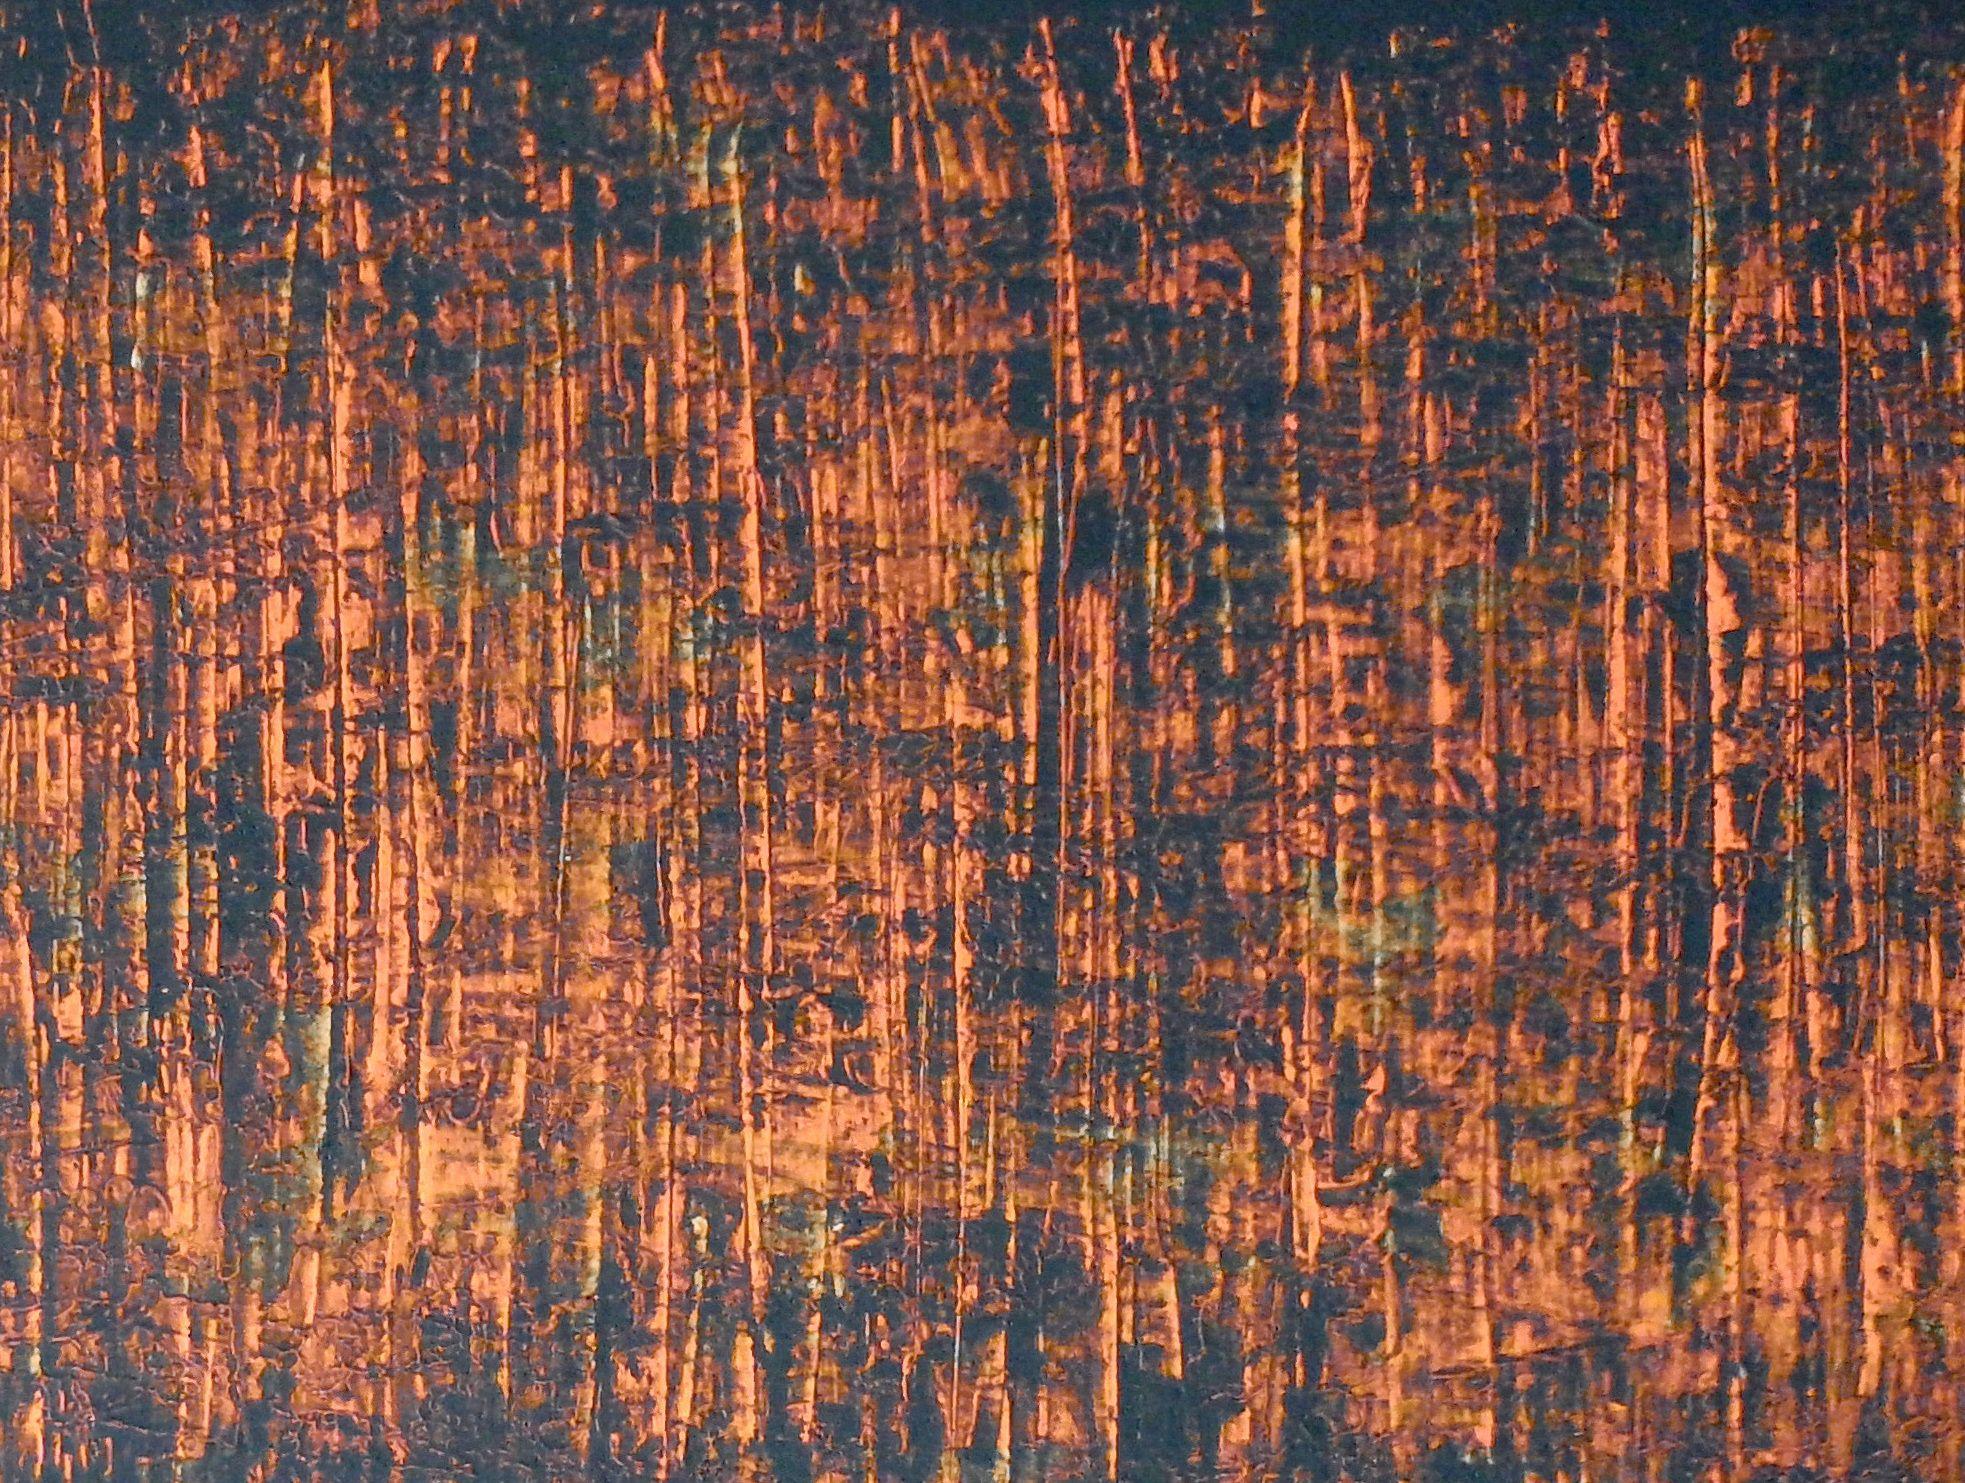 Black Orange No. 2 (On Cork), Painting, Acrylic on Other - Beige Abstract Painting by Carla Sá Fernandes